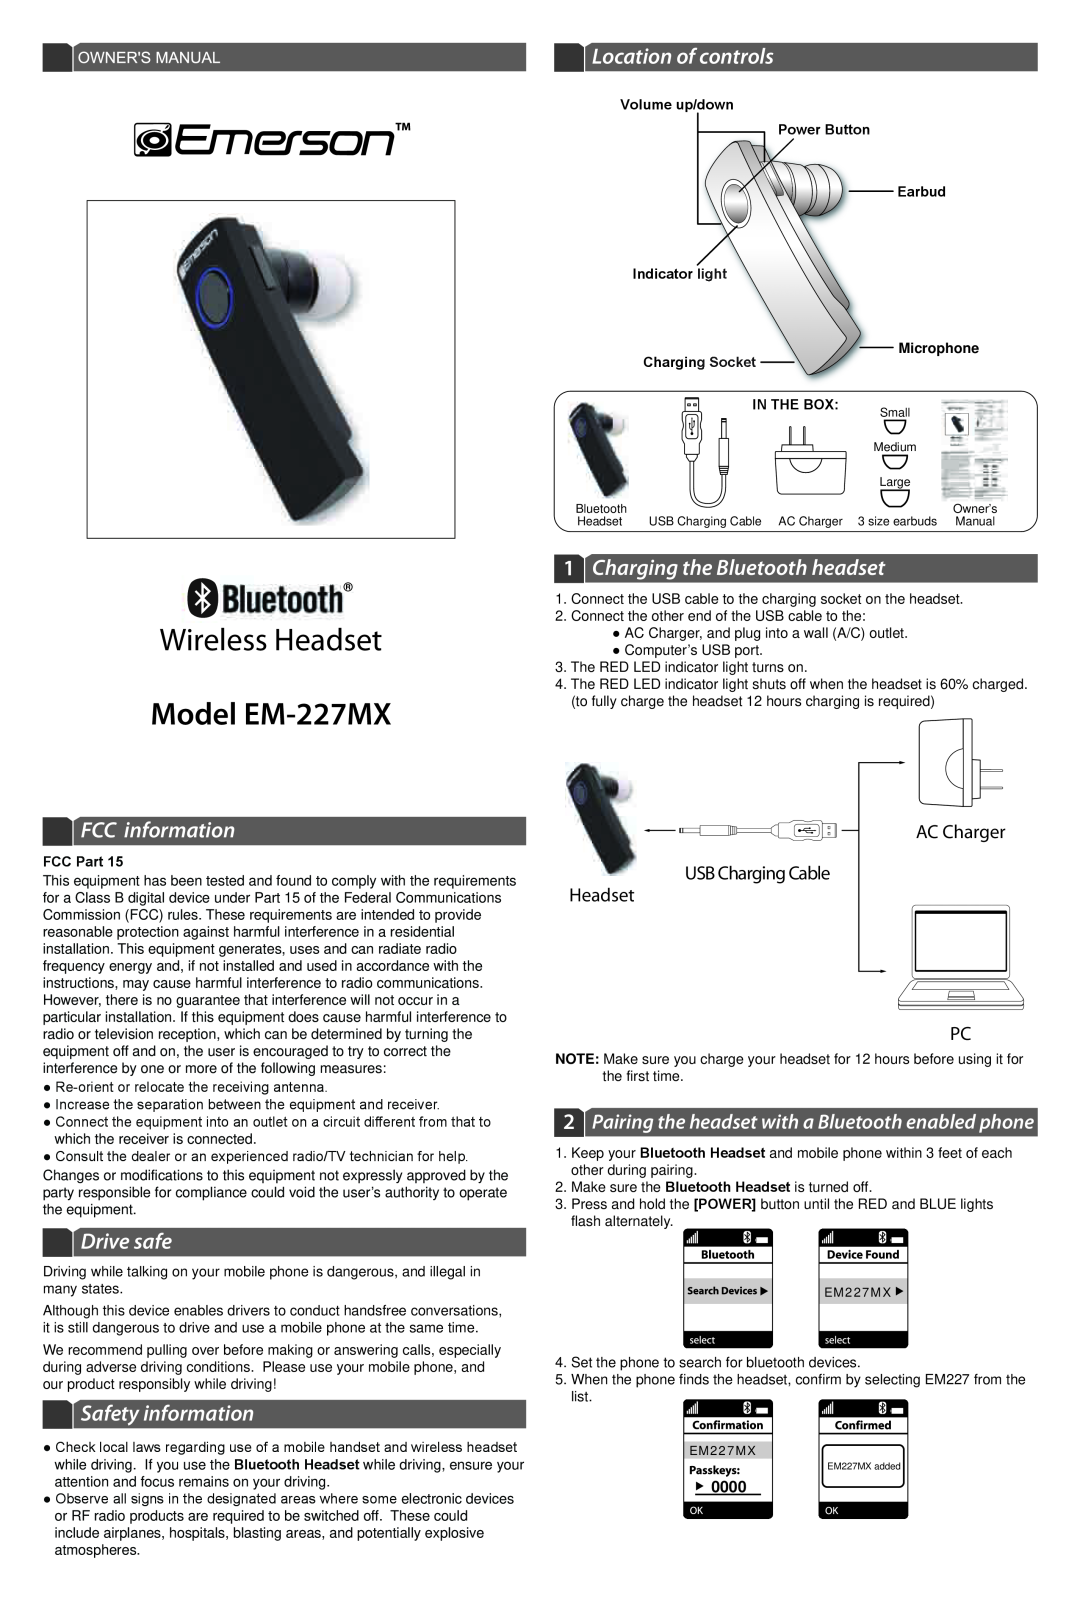 Emerson EM227MX owner manual FCC information, Drive safe, Safety information, Location of controls, 0000, Wireless Headset 